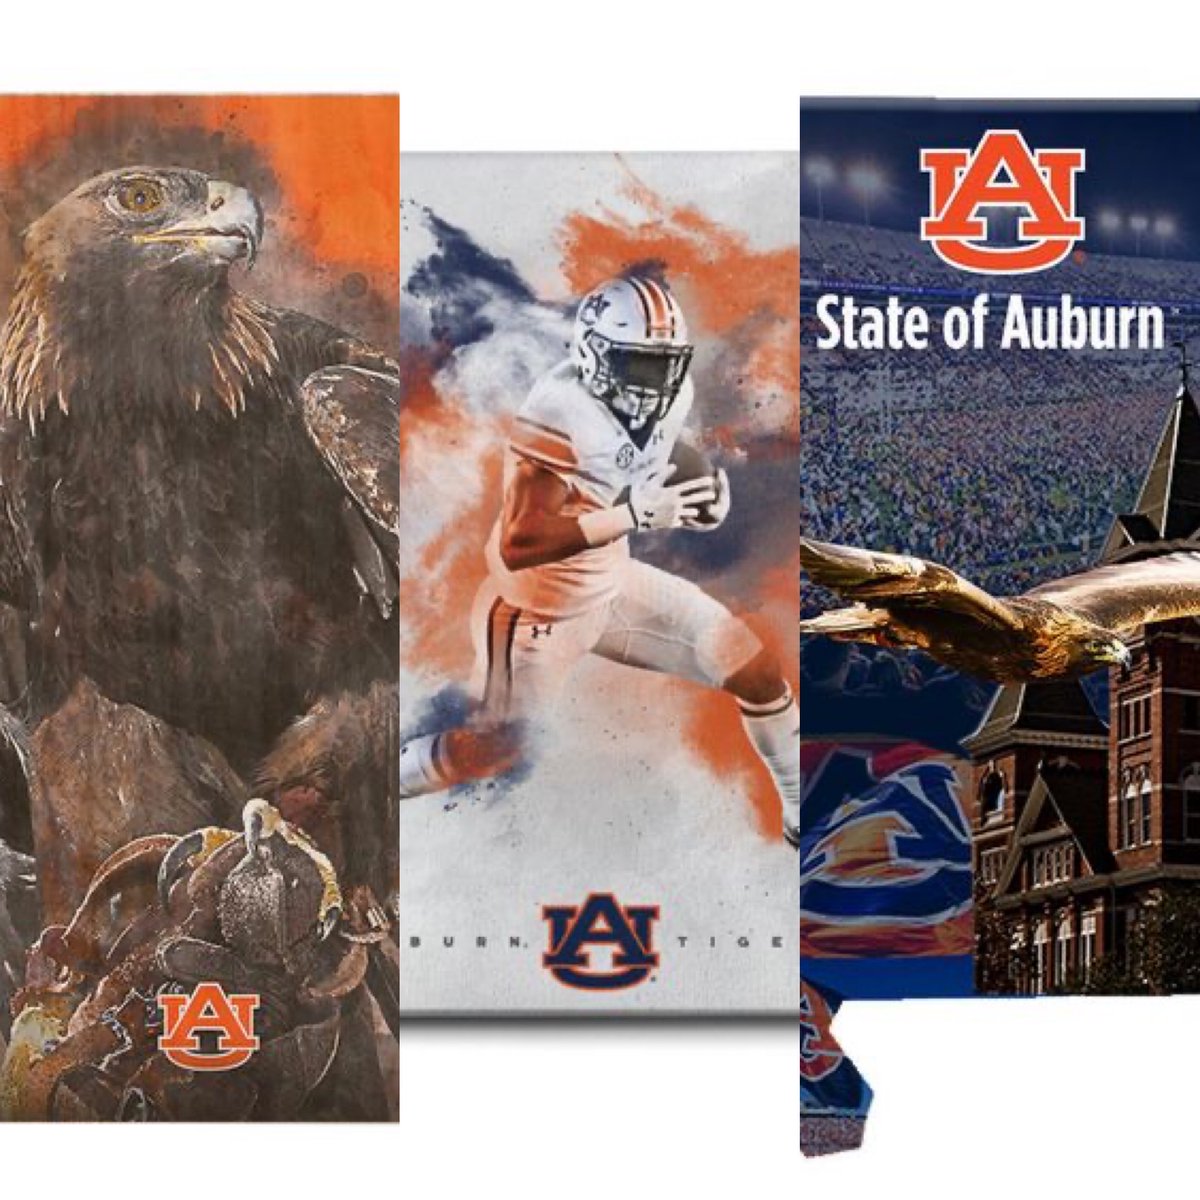 Did you know War Eagle is Auburn’s Battle Cry and not a nickname or mascot? The image on the left of the eagle on wood is amazing. See all our products at collegewallart.com.